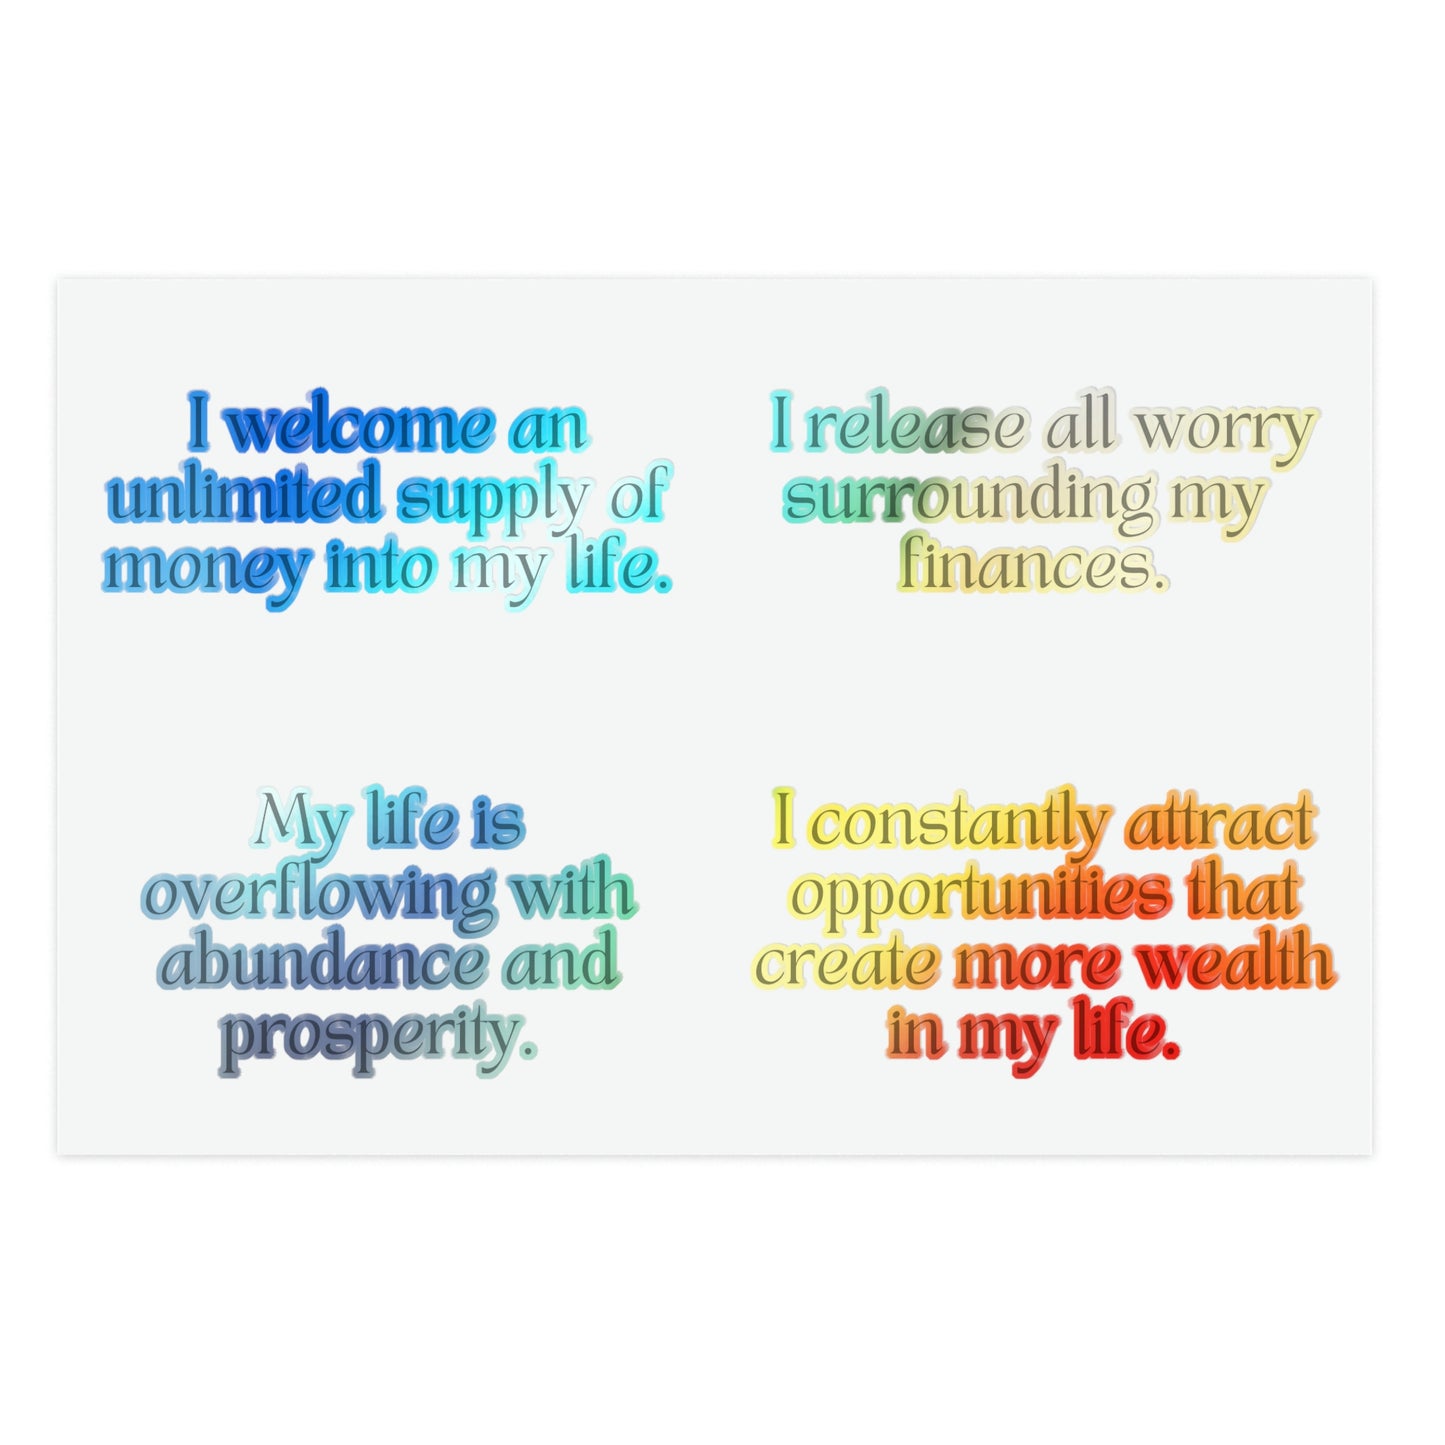 Holographic decorative sheet of affirmation stickers for attracting wealth using affirmation sticker manifestation method. Front side displayed. 